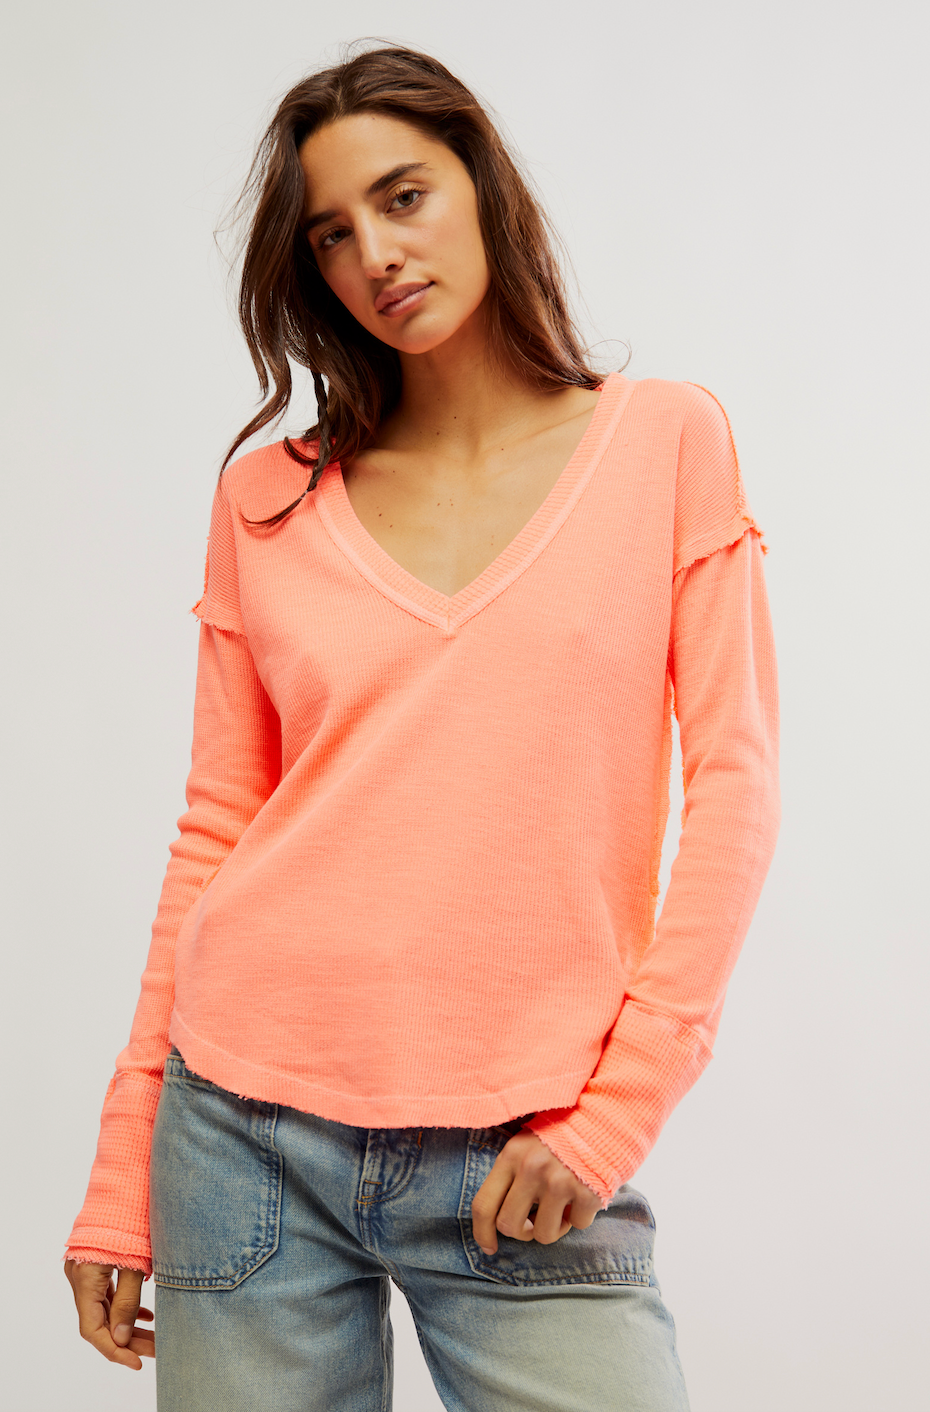 FREE PEOPLE SAIL AWAY LONG SLEEVE SOLID TOP IN FLUORESCENT CORAL